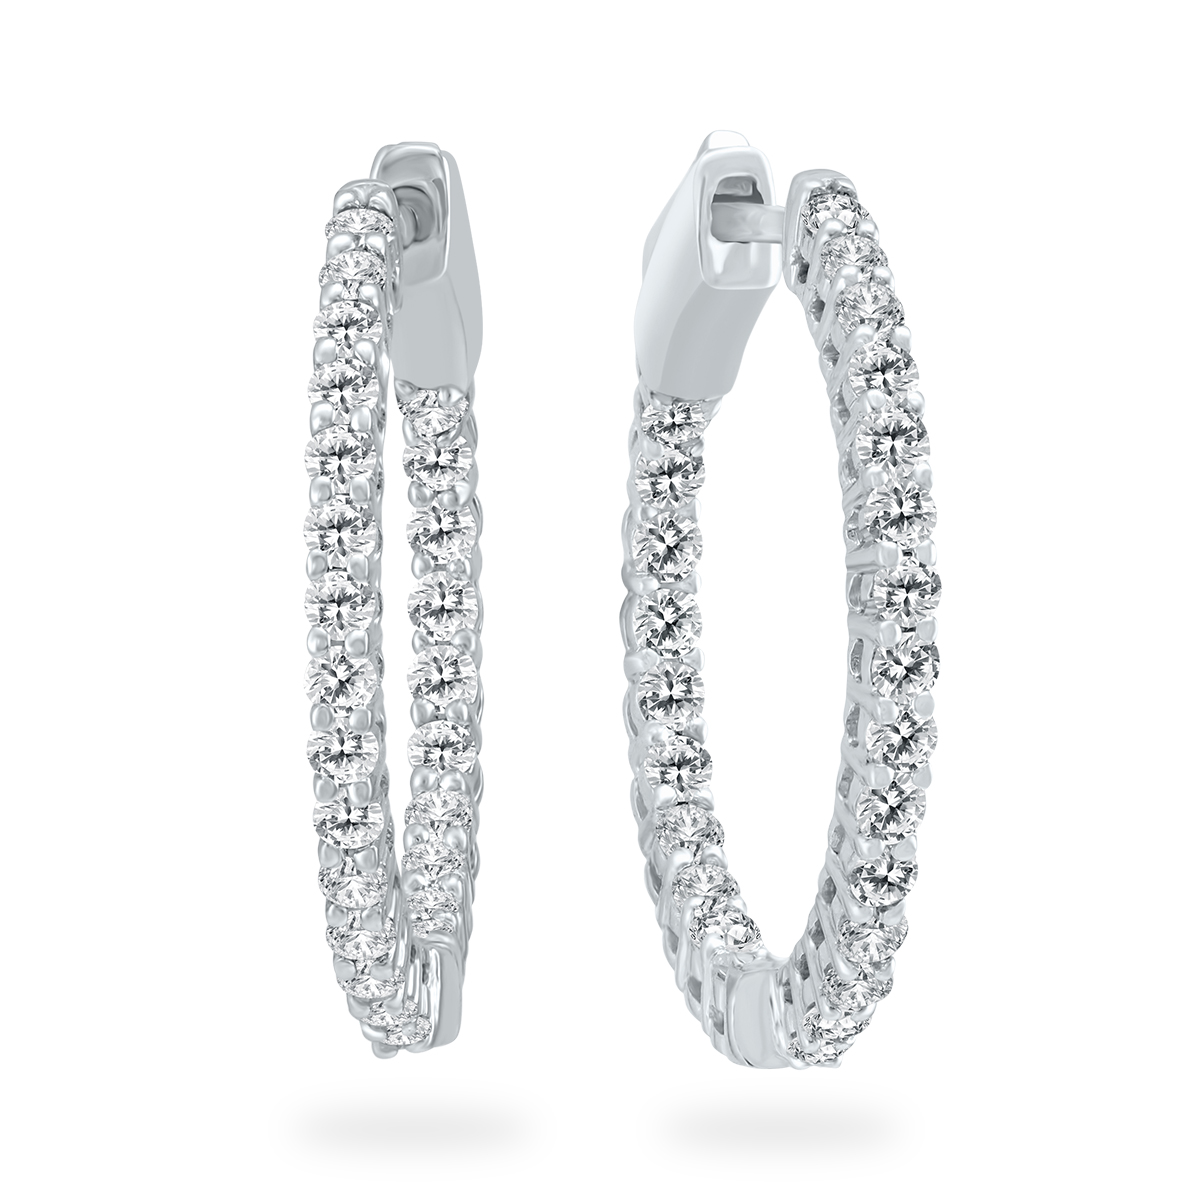 AGS Certified 1 Carat TW Round Diamond Hoop Earrings with Push Down Button Locks in 14K White Gold